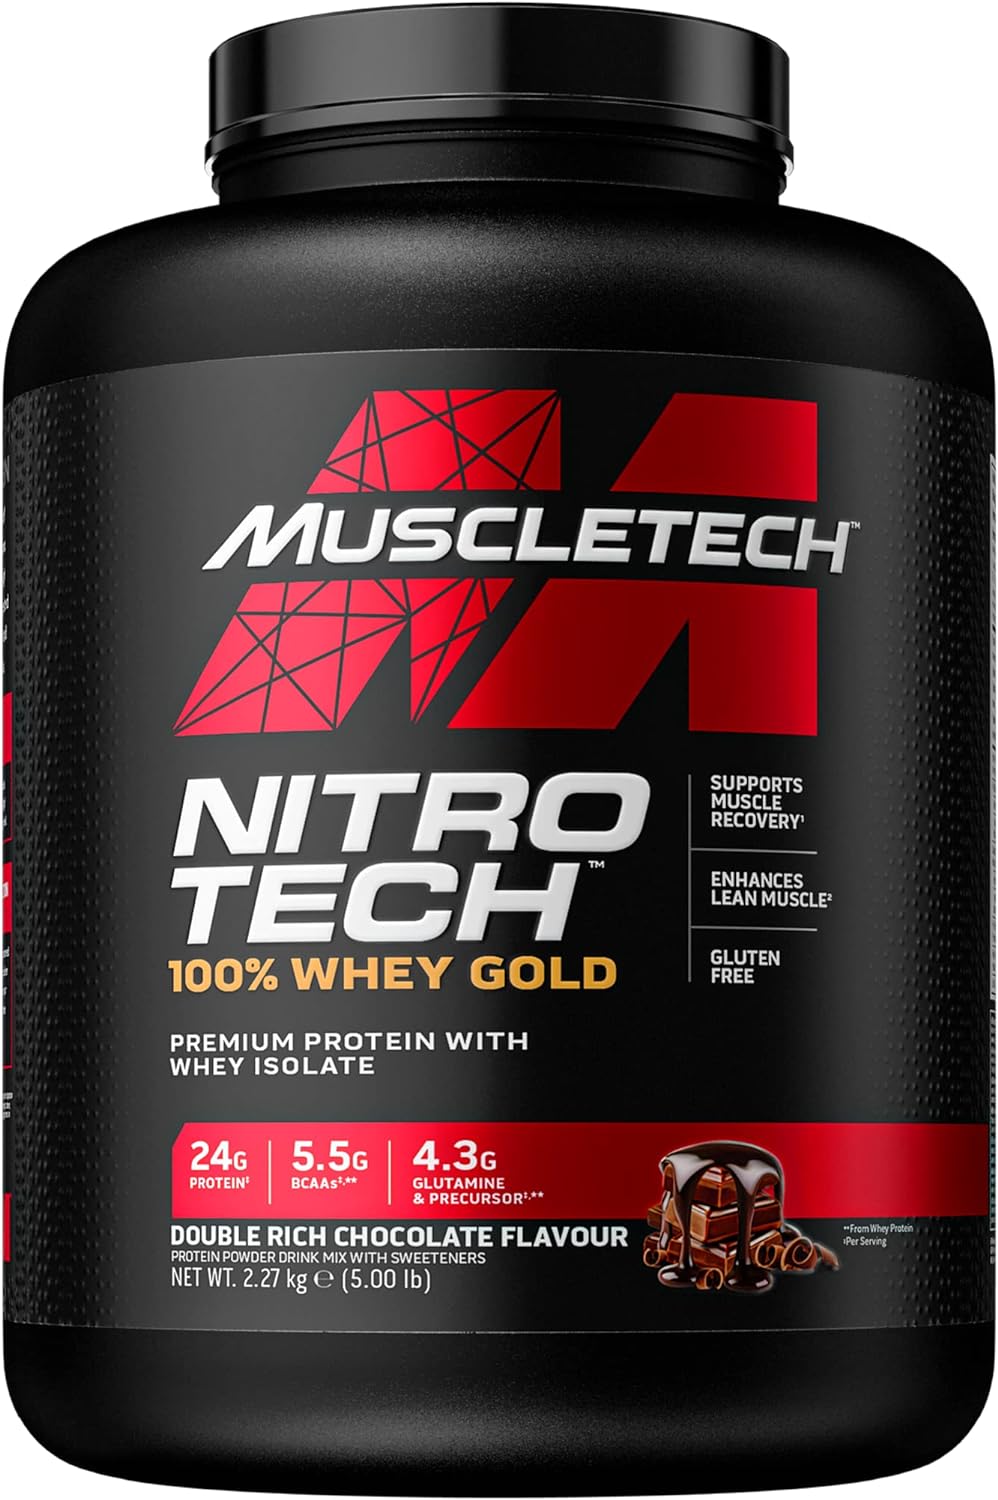 MuscleTech NitroTech 100% Whey Gold Protein Powder, Build Muscle Mass, Whey Isolate Protein Powder and Peptides, Protein Shake For Men and Women, 5.5 g BCAA